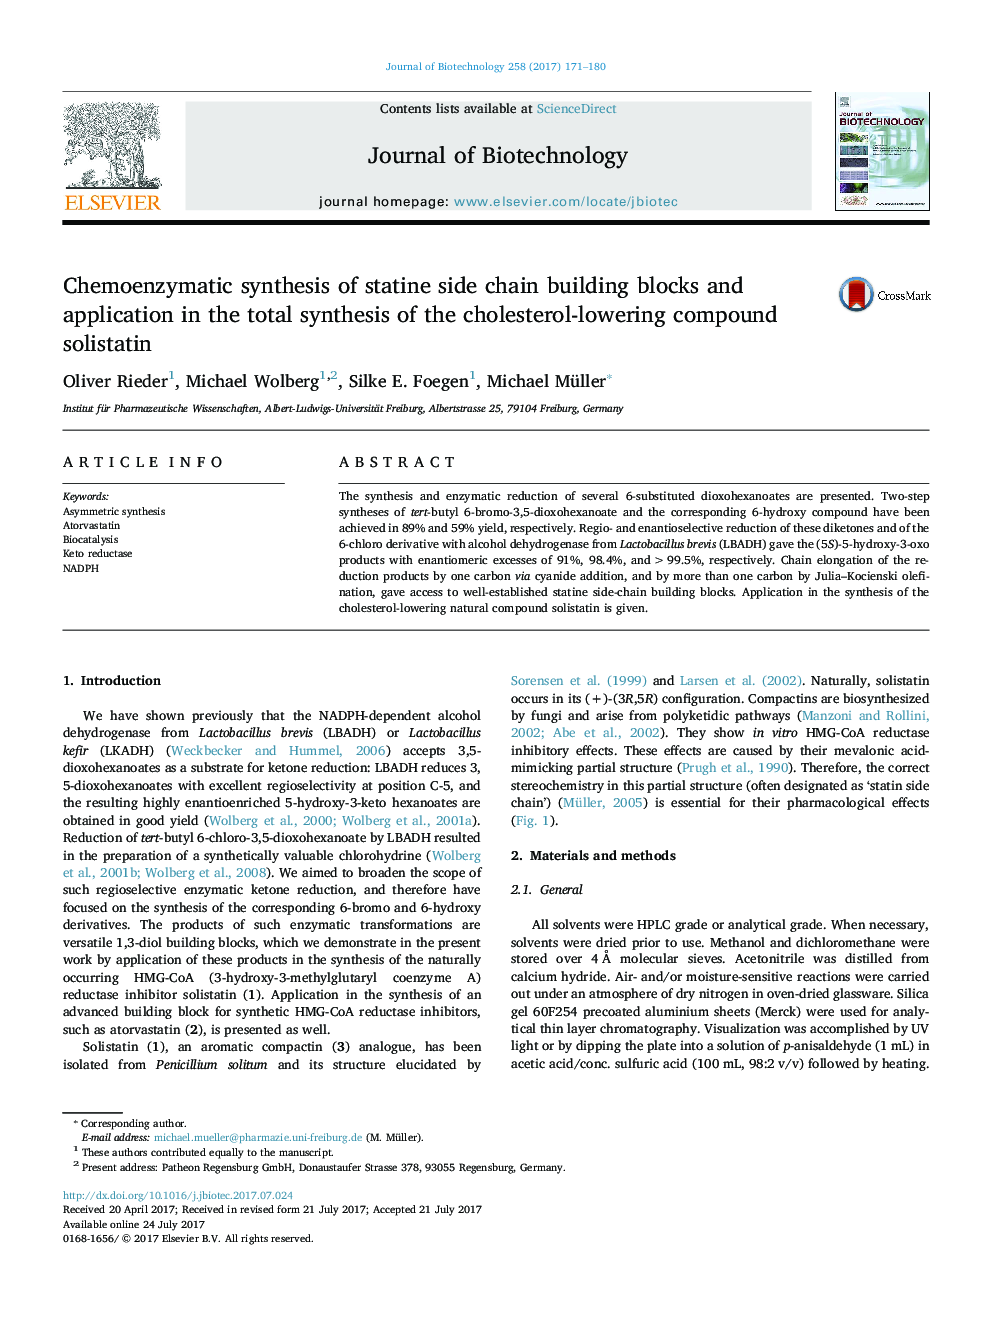 Chemoenzymatic synthesis of statine side chain building blocks and application in the total synthesis of the cholesterol-lowering compound solistatin